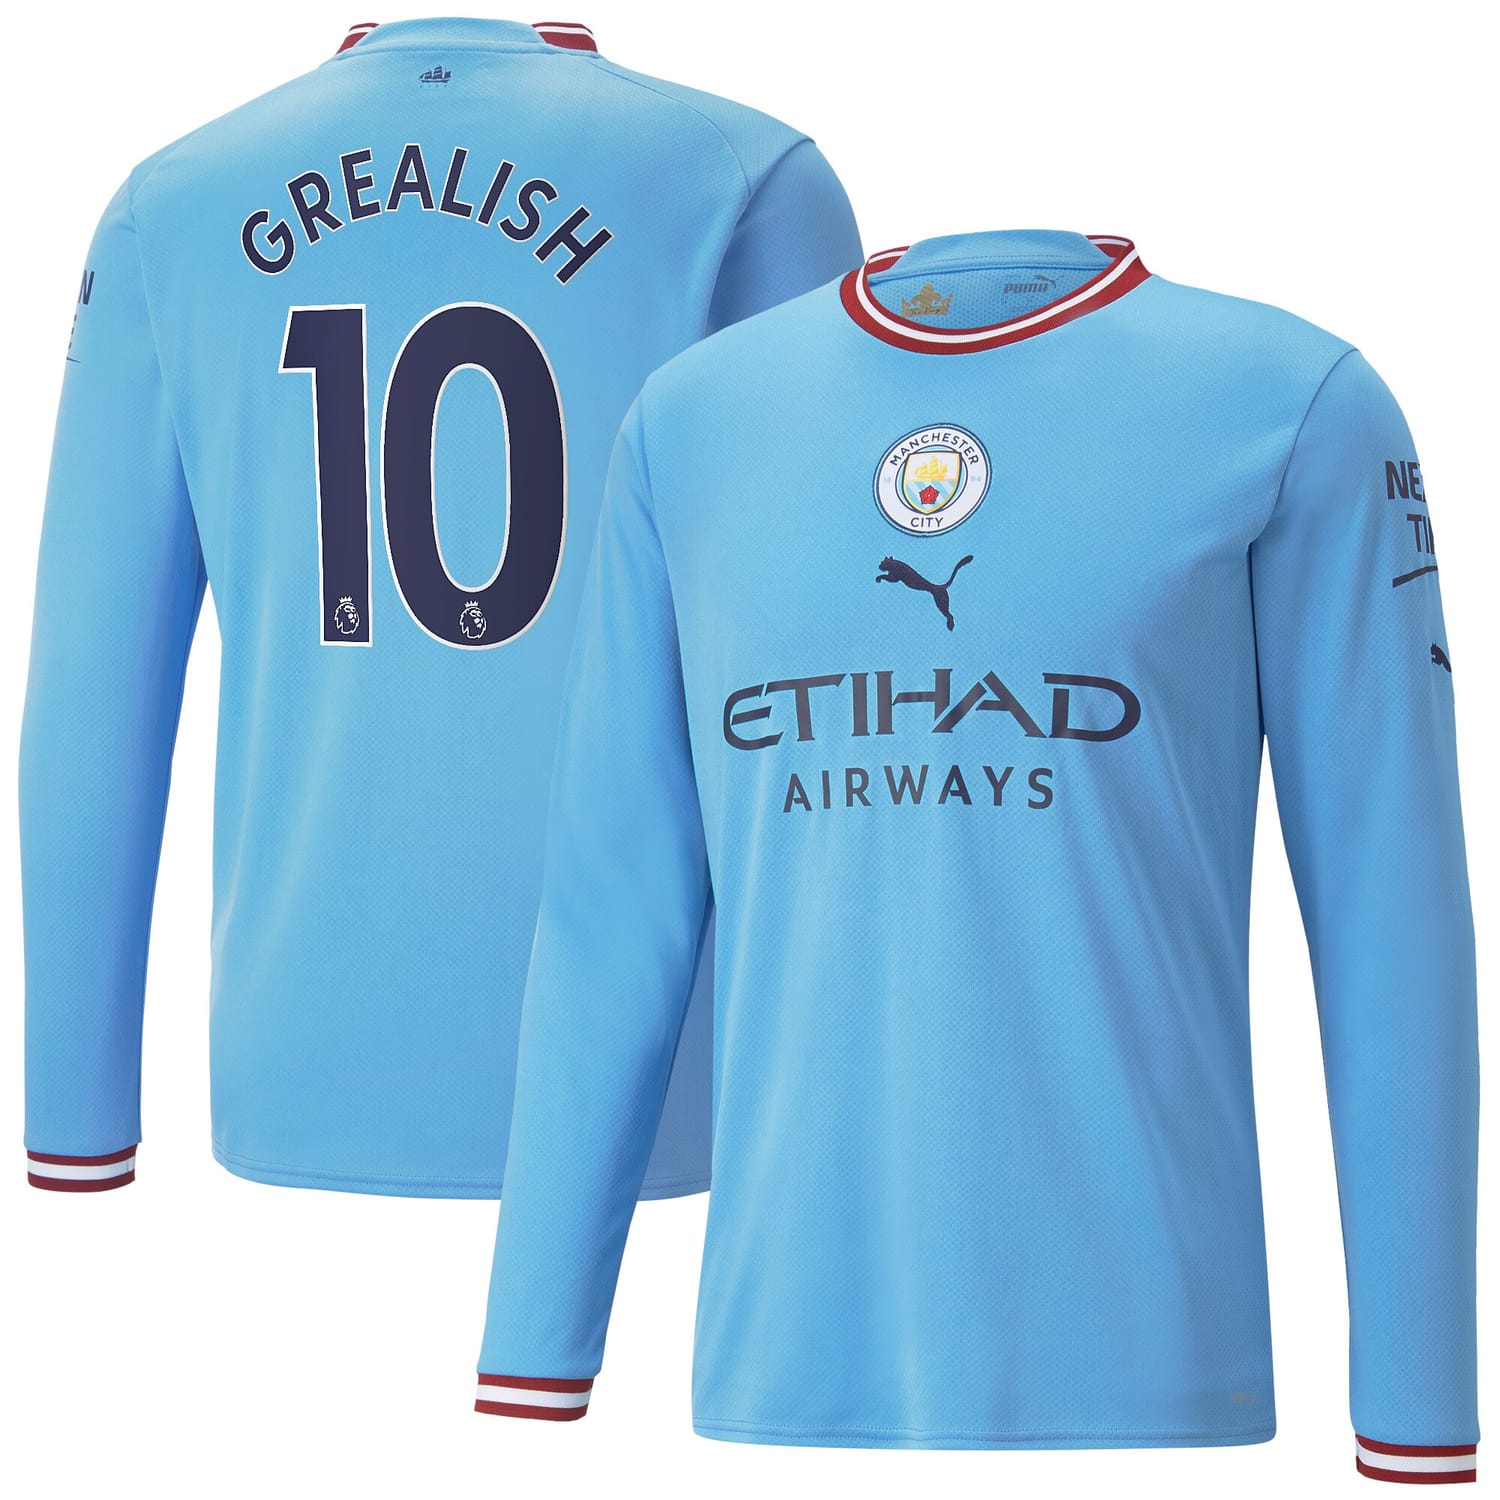 Premier League Manchester City Home Jersey Shirt Long Sleeve 2022-23 player Jack Grealish 10 printing for Men